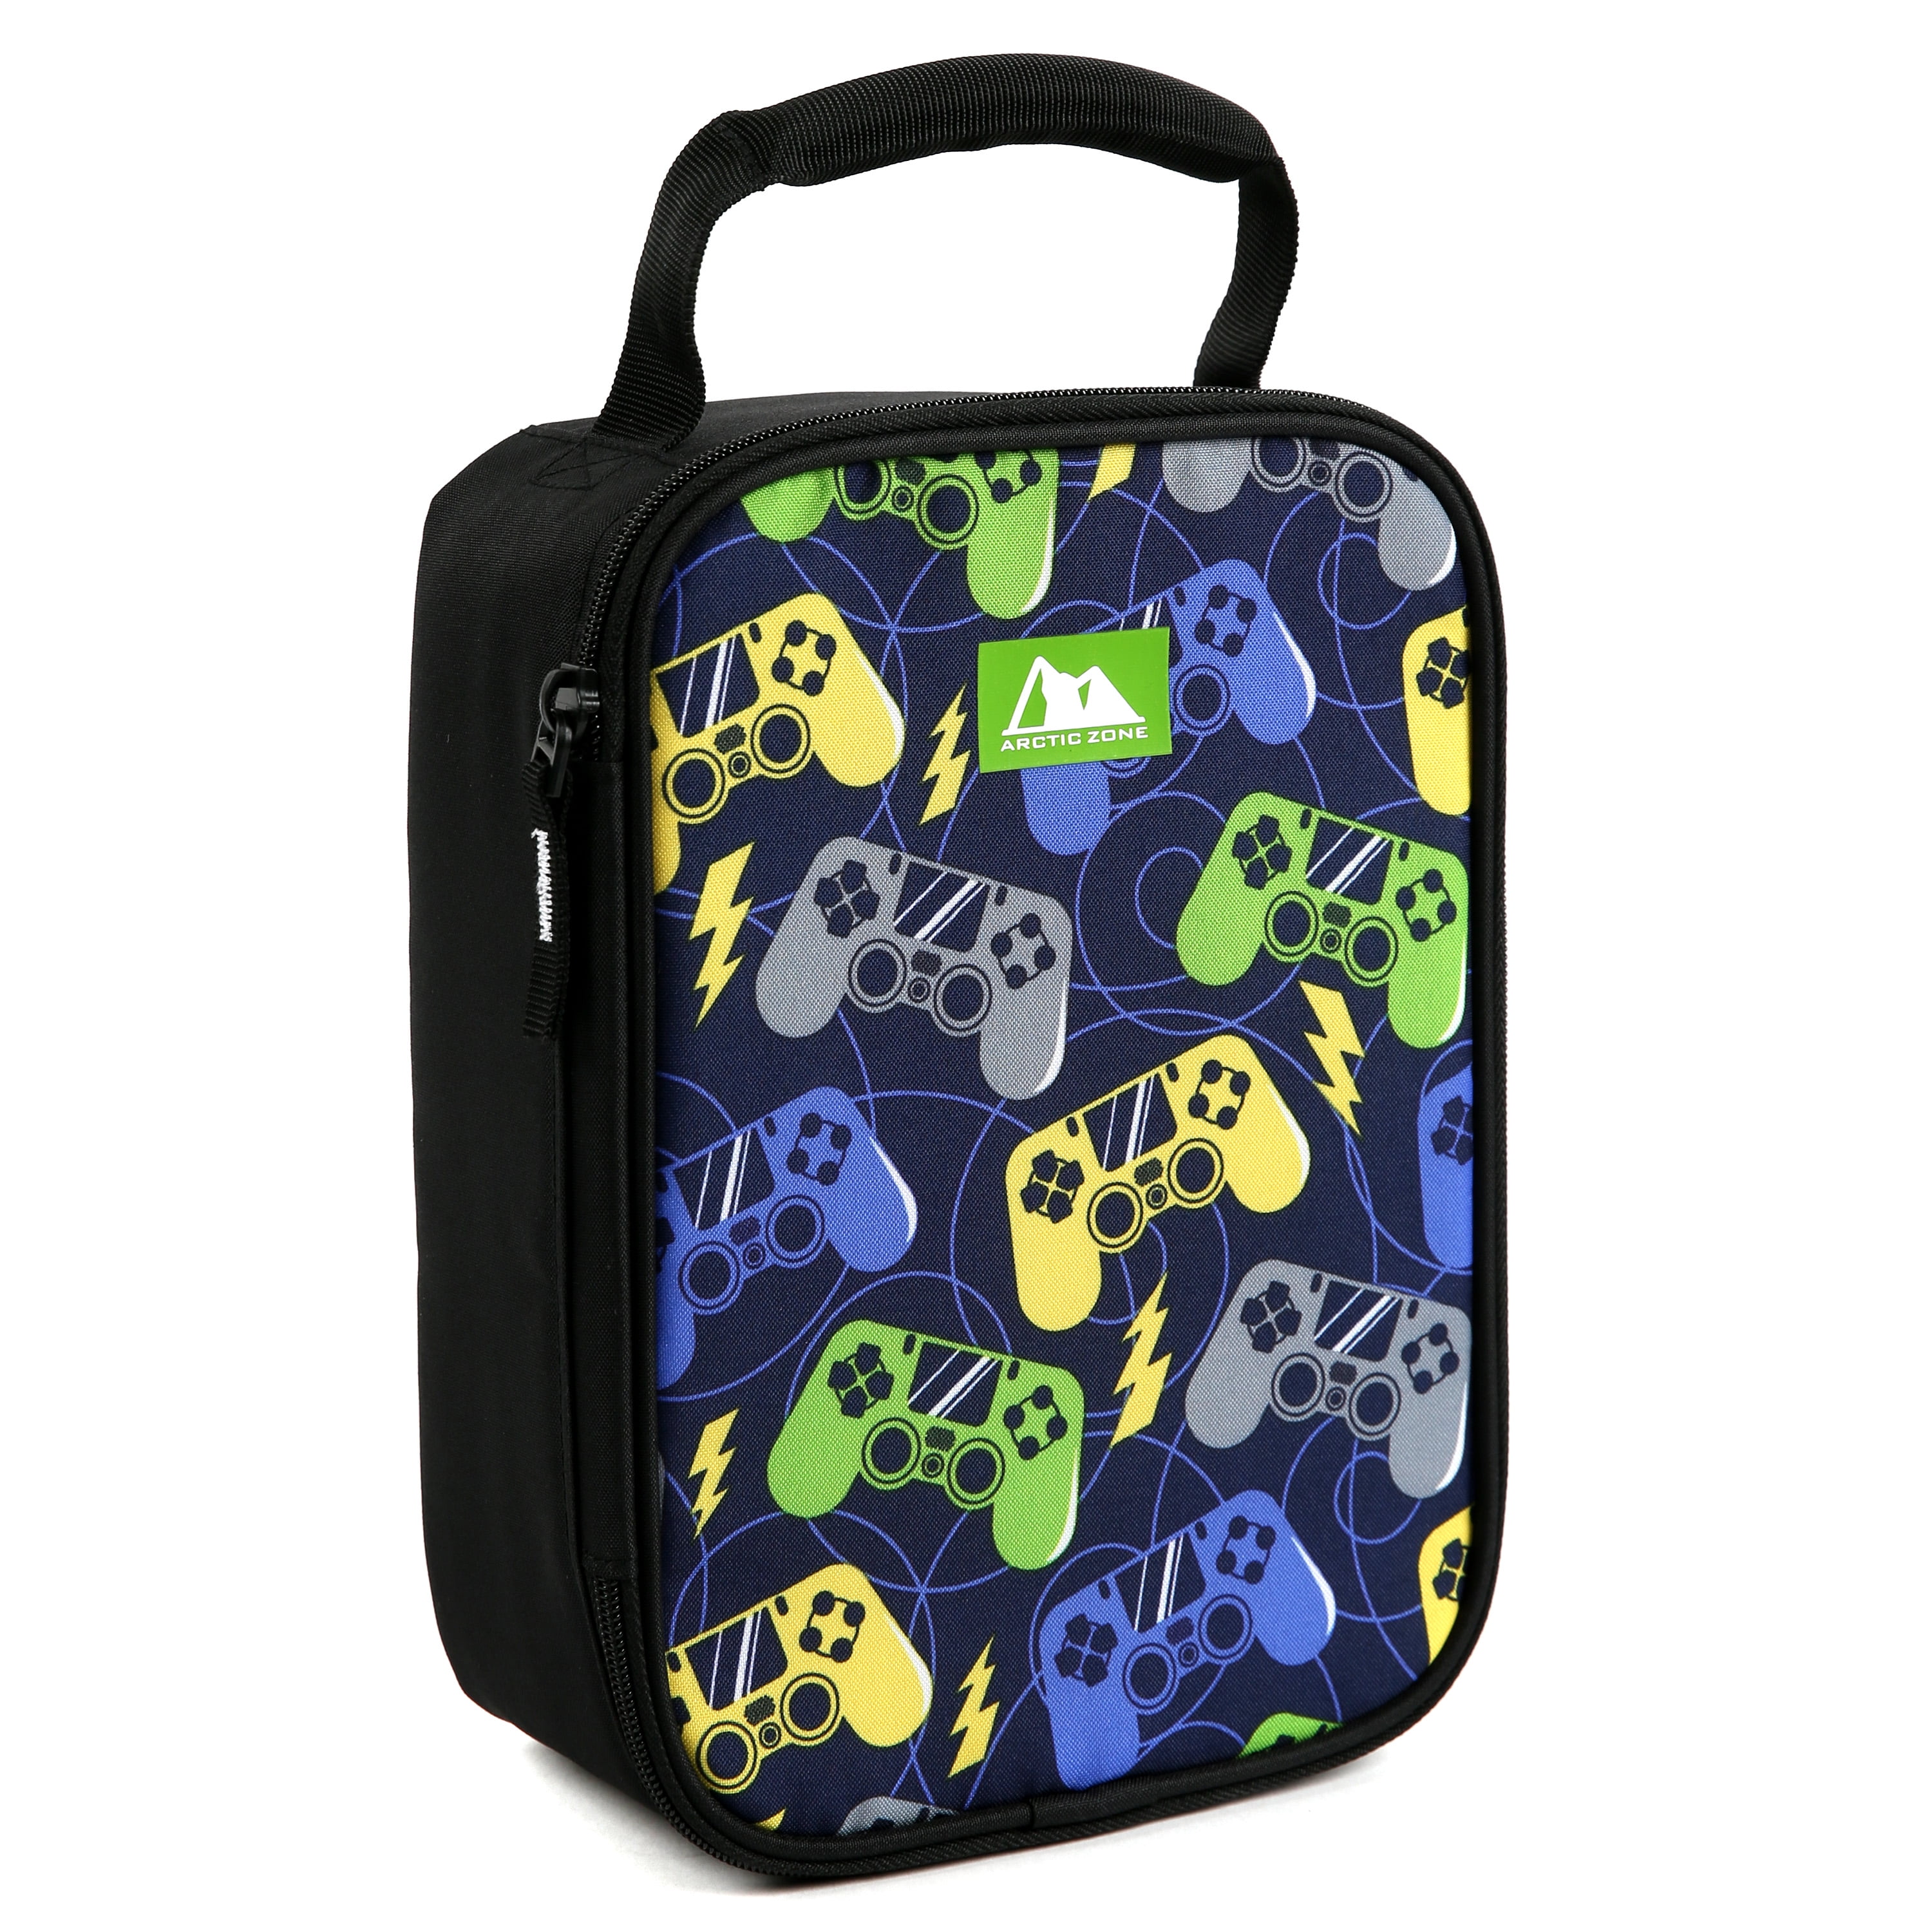  Keceur Colorful Gamepad Weapon Gamer Lunch Box